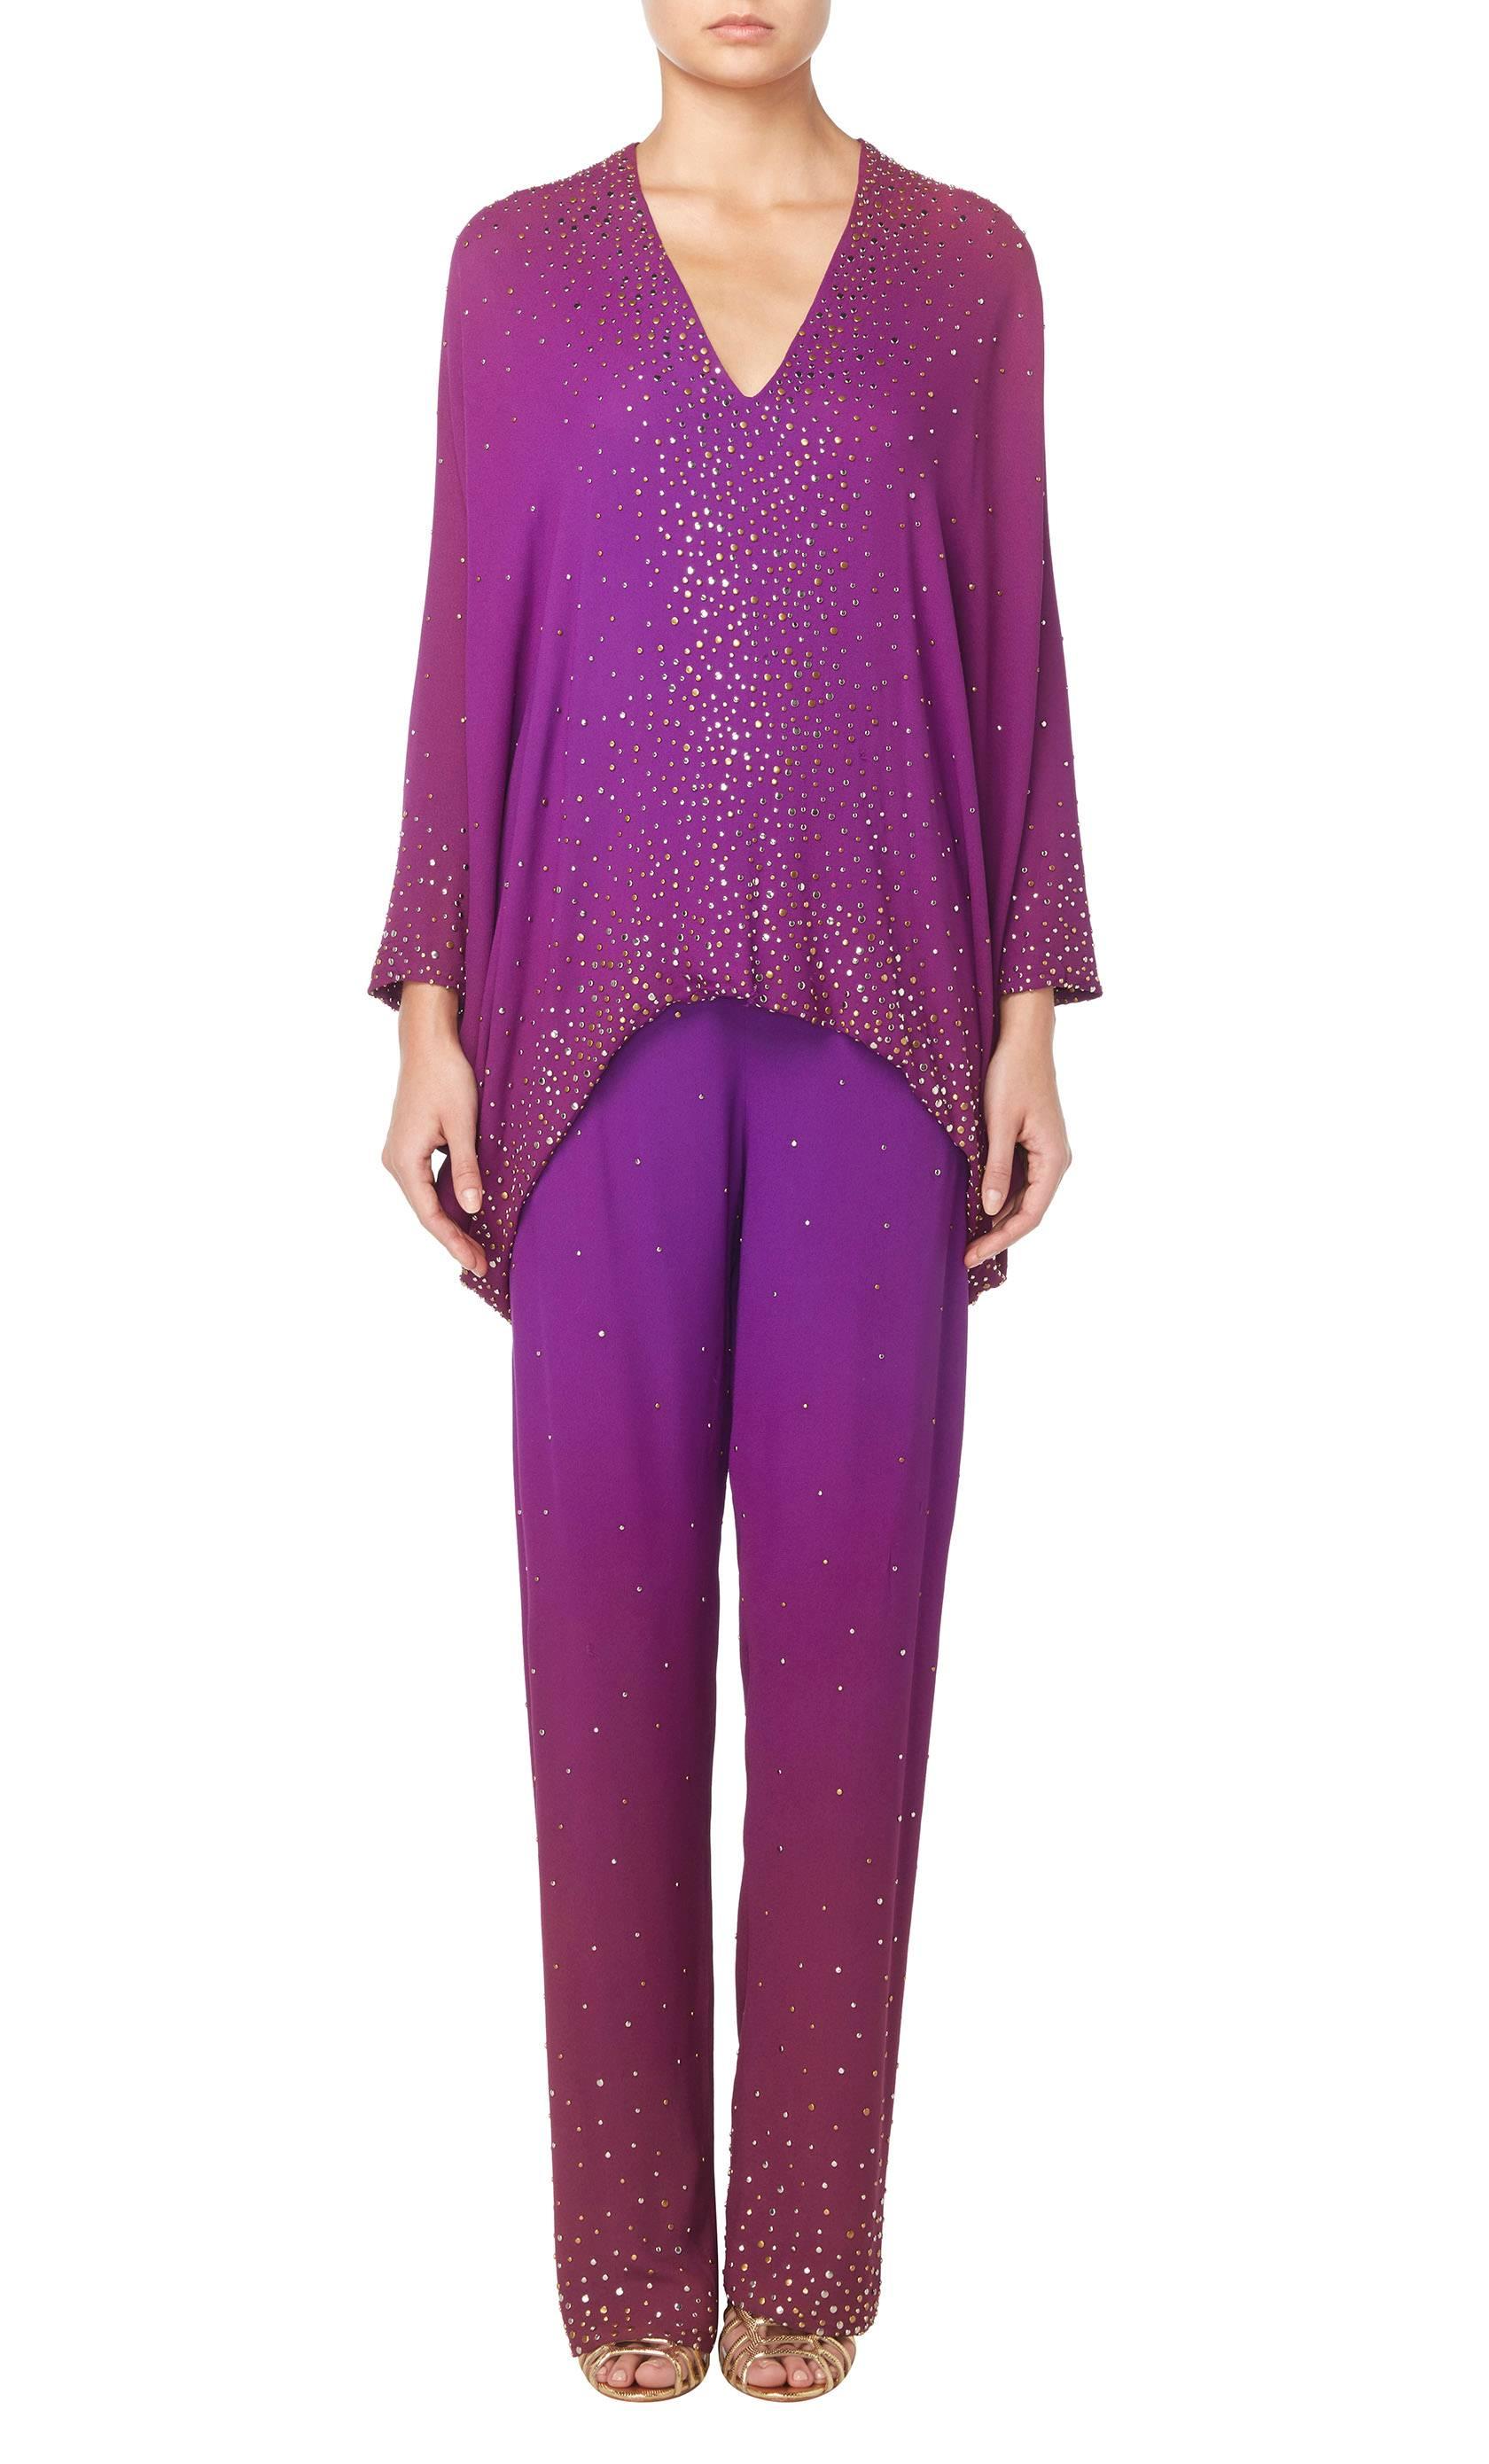 This amazing Halston ensemble is a colourful option for an evening event. Constructed from ombre purple silk, the suit is made up of an oversized top and wide leg trousers embellished with gold and silver studwork, adding a touch of sparkle. The top